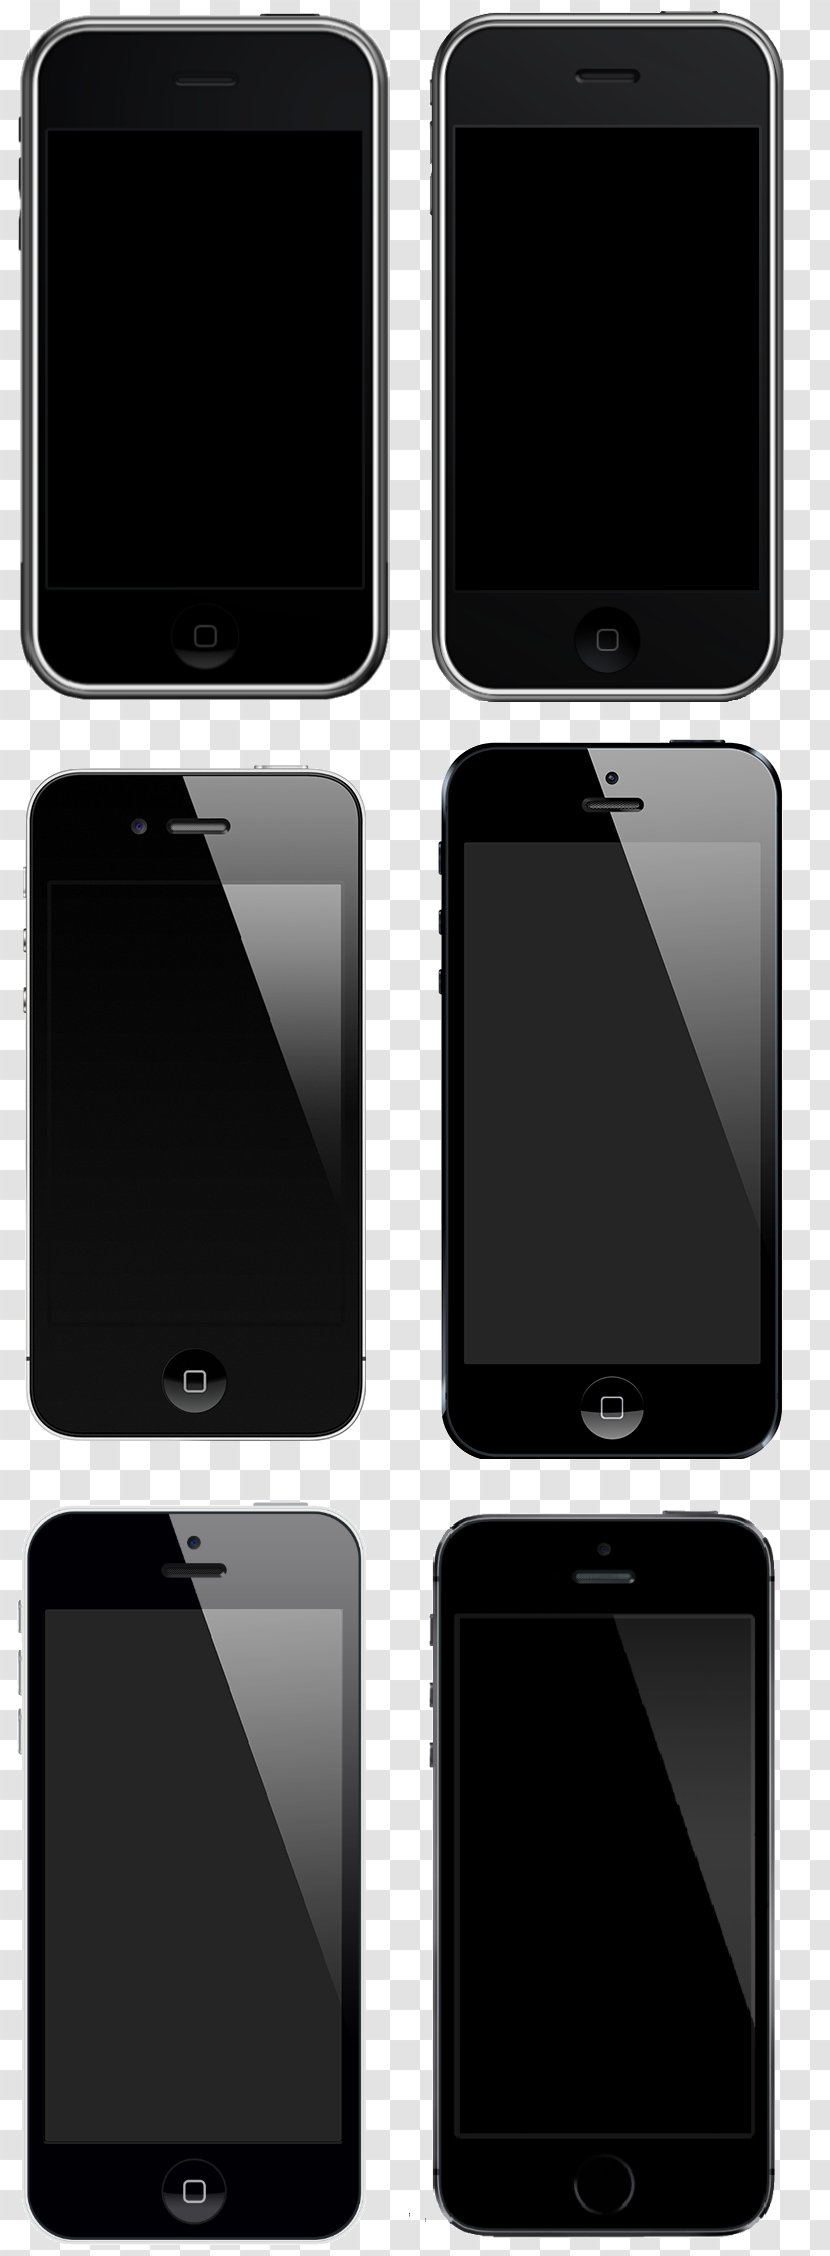 IPhone 4S 8 Apple Smartphone - Mobile Phone Transparent PNG